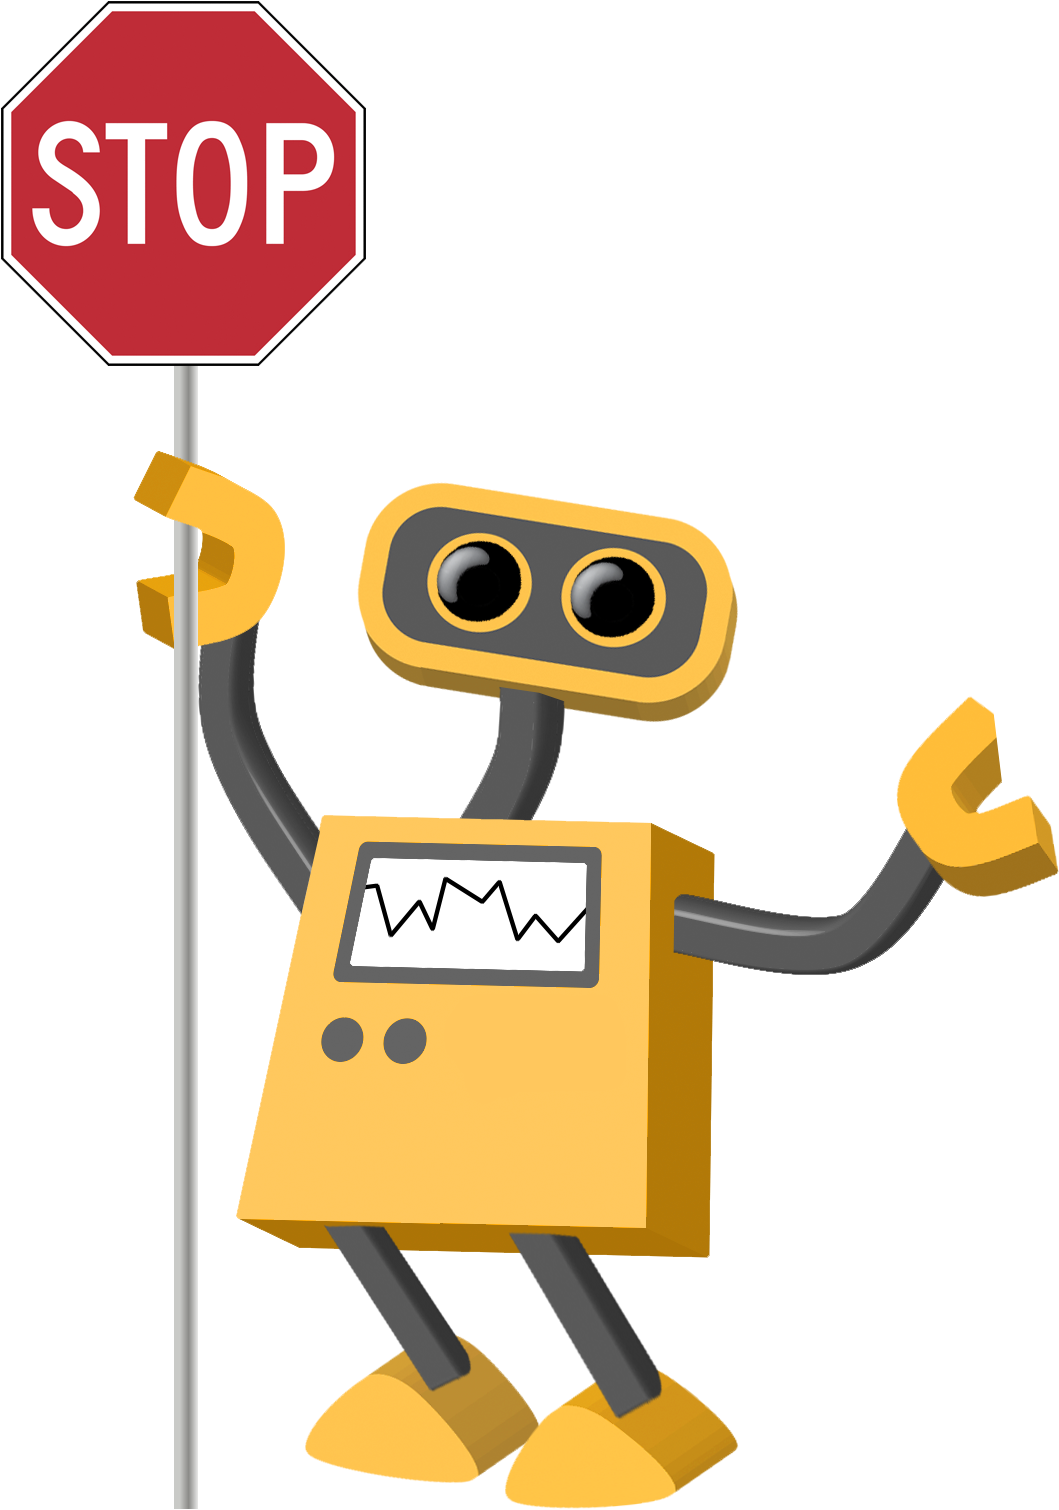 Robot Holding Stop Sign PNG image